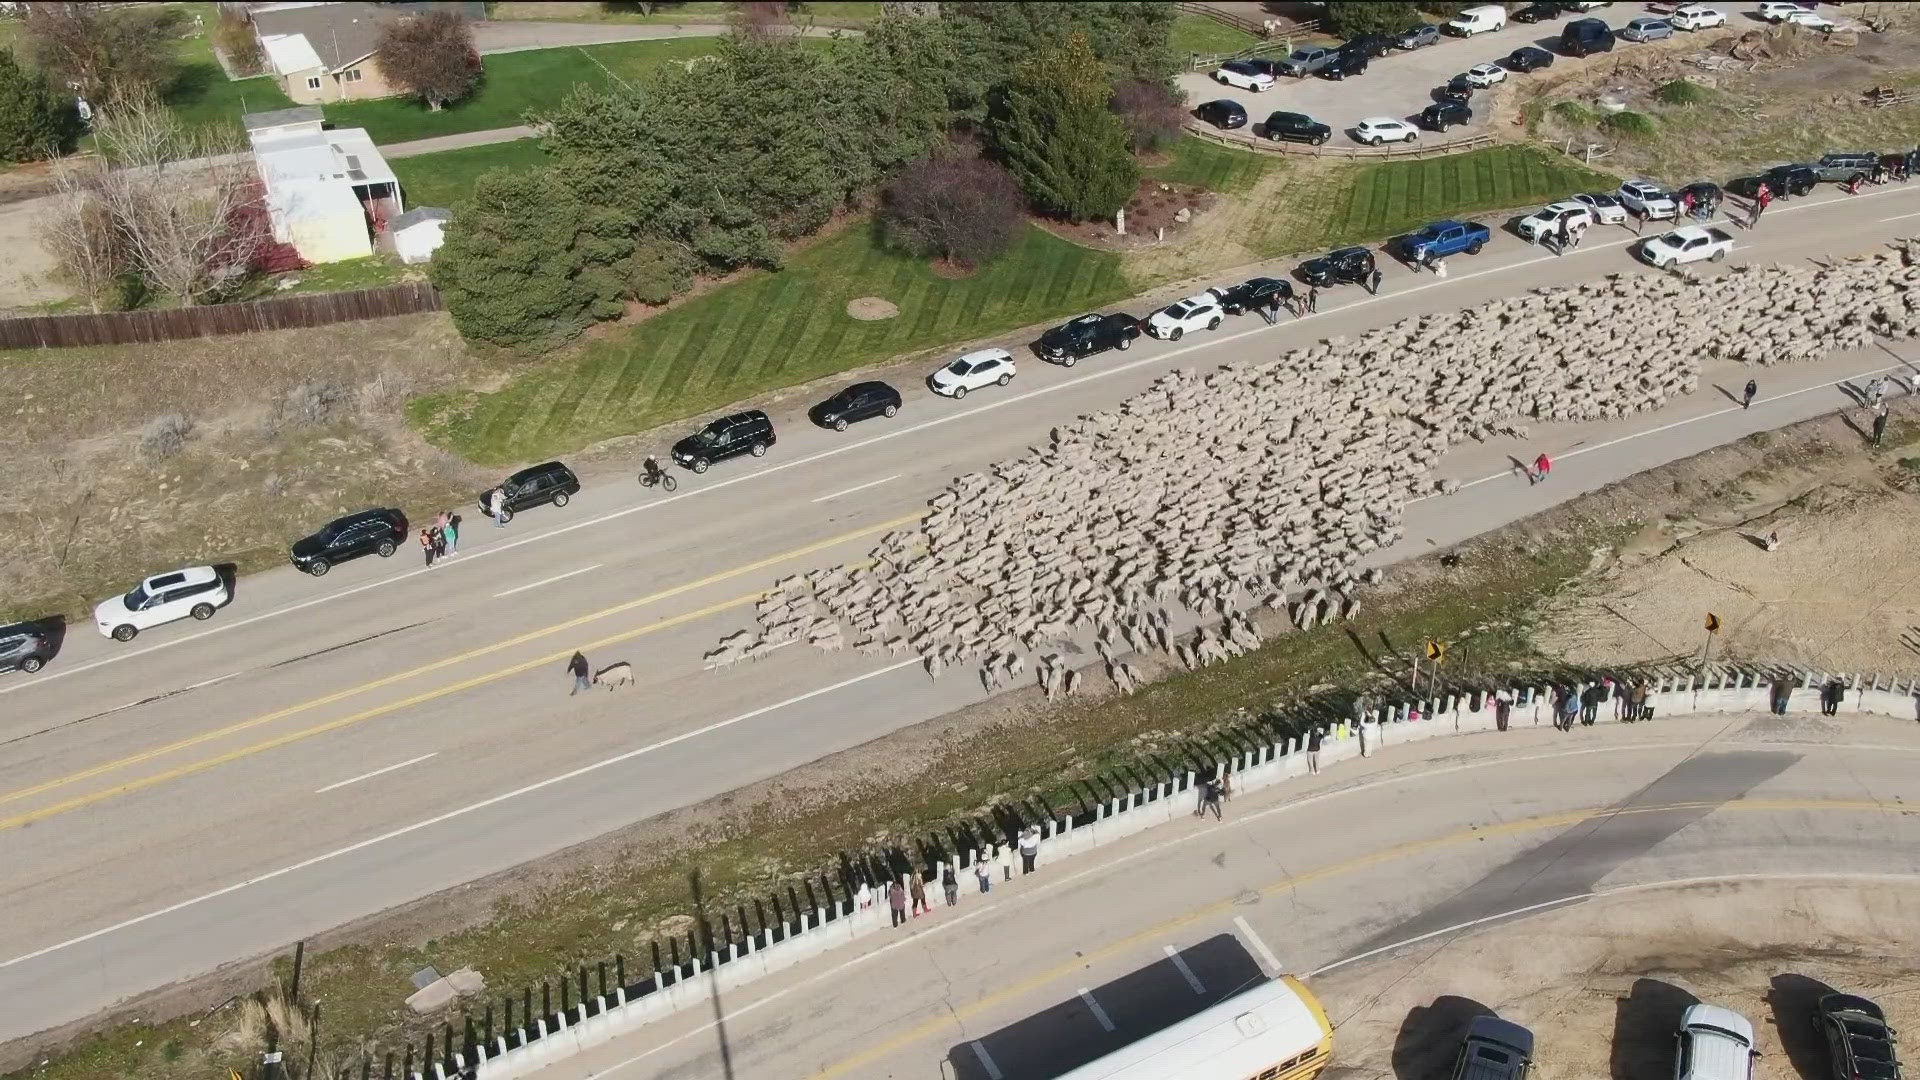 The flock is taking over the block as the sheep are moved for the Spring.